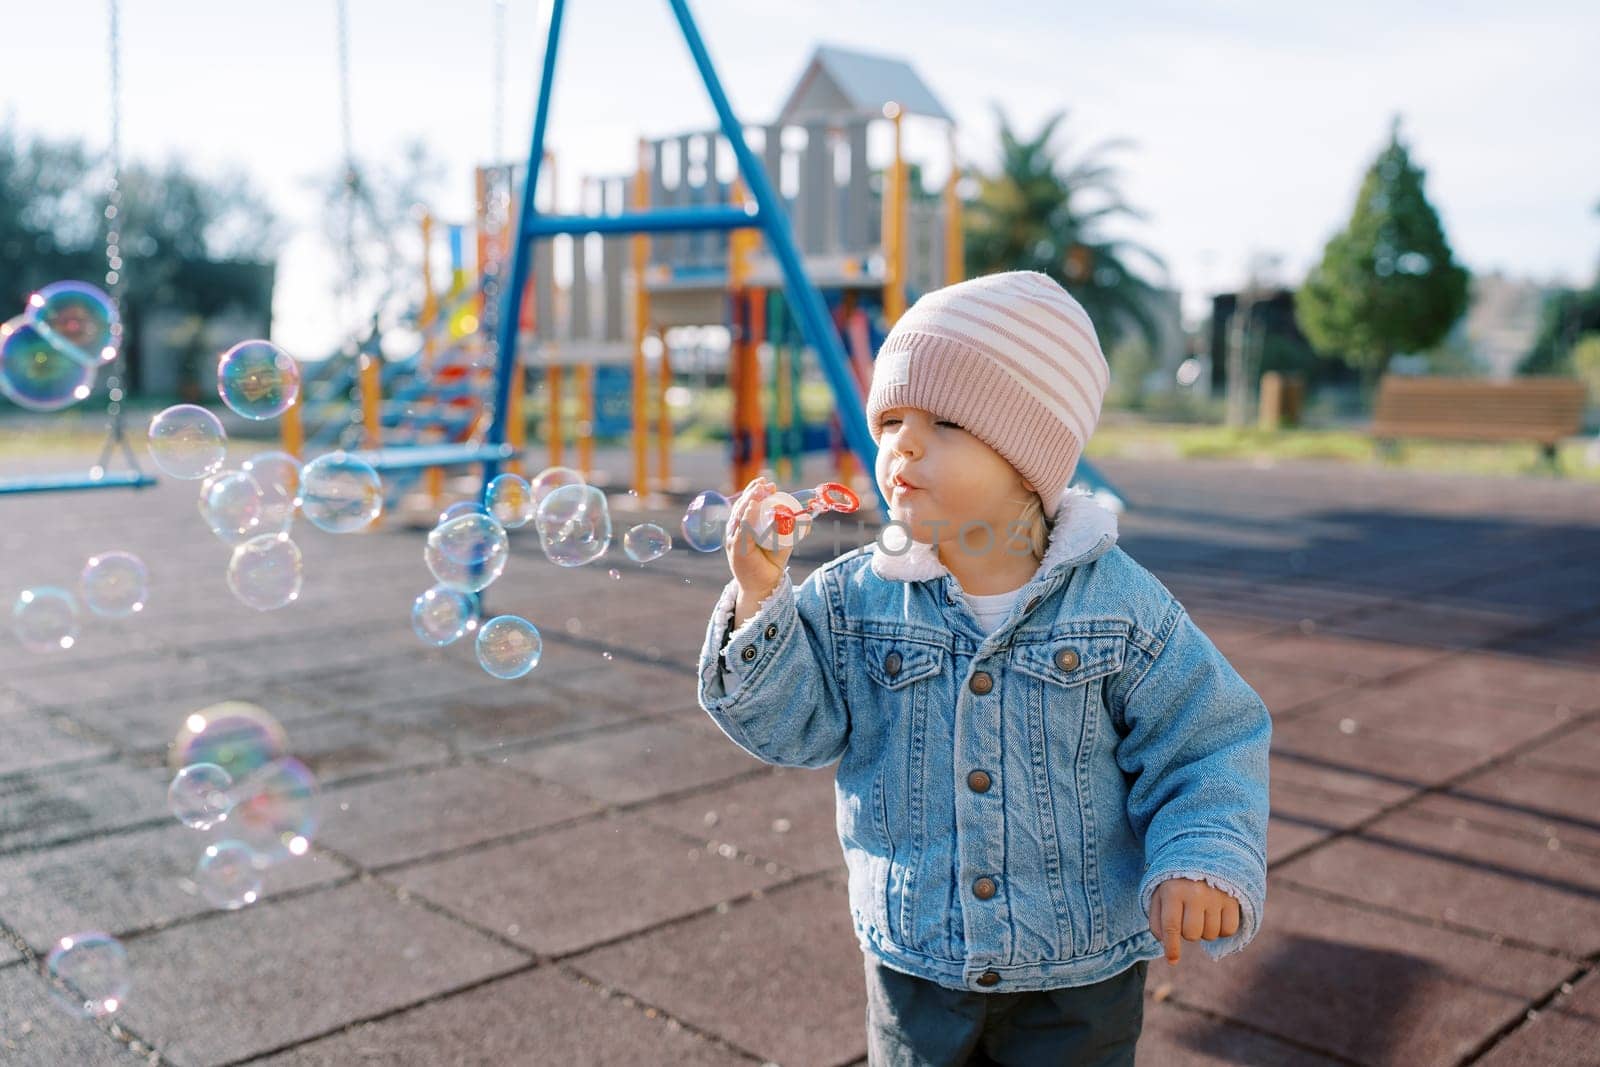 Little girl blowing soap bubbles on the playground. High quality photo